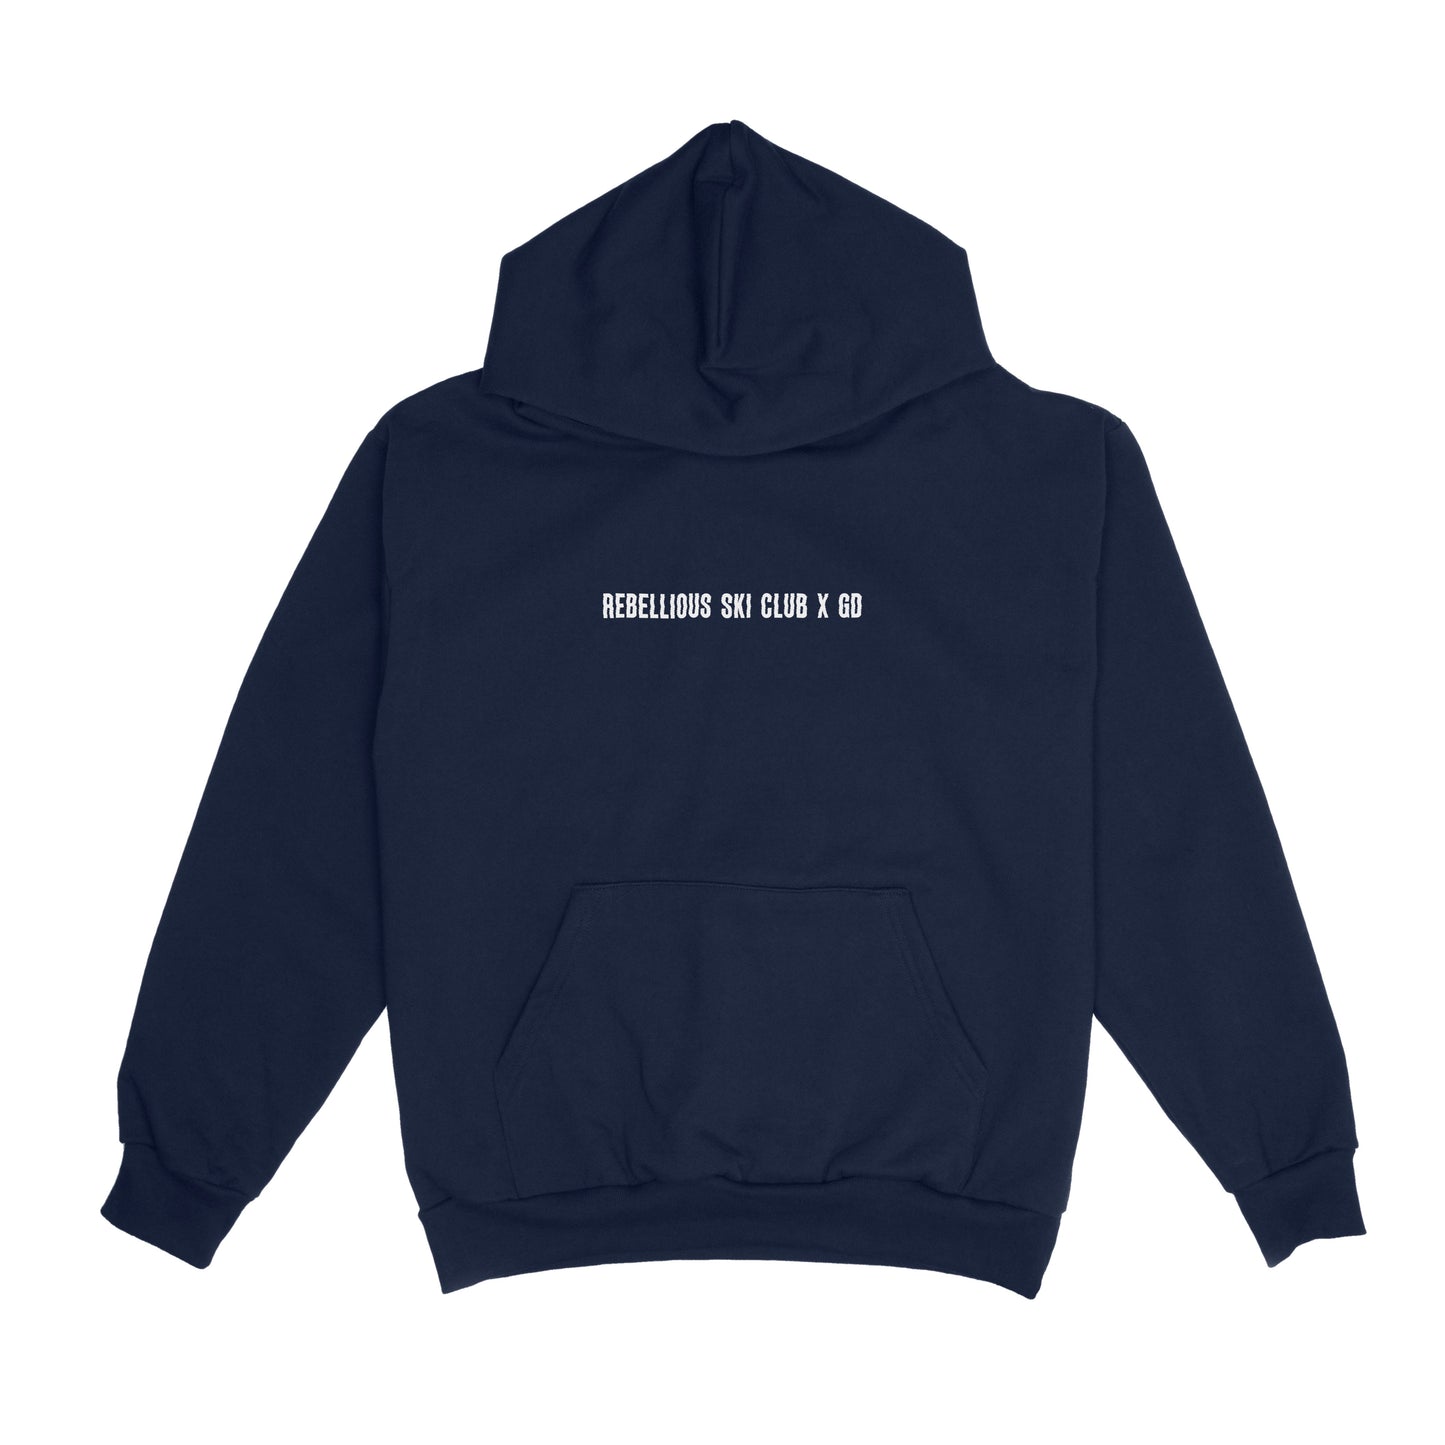 "Not Everything You Send Gets Delivered" Hoodie